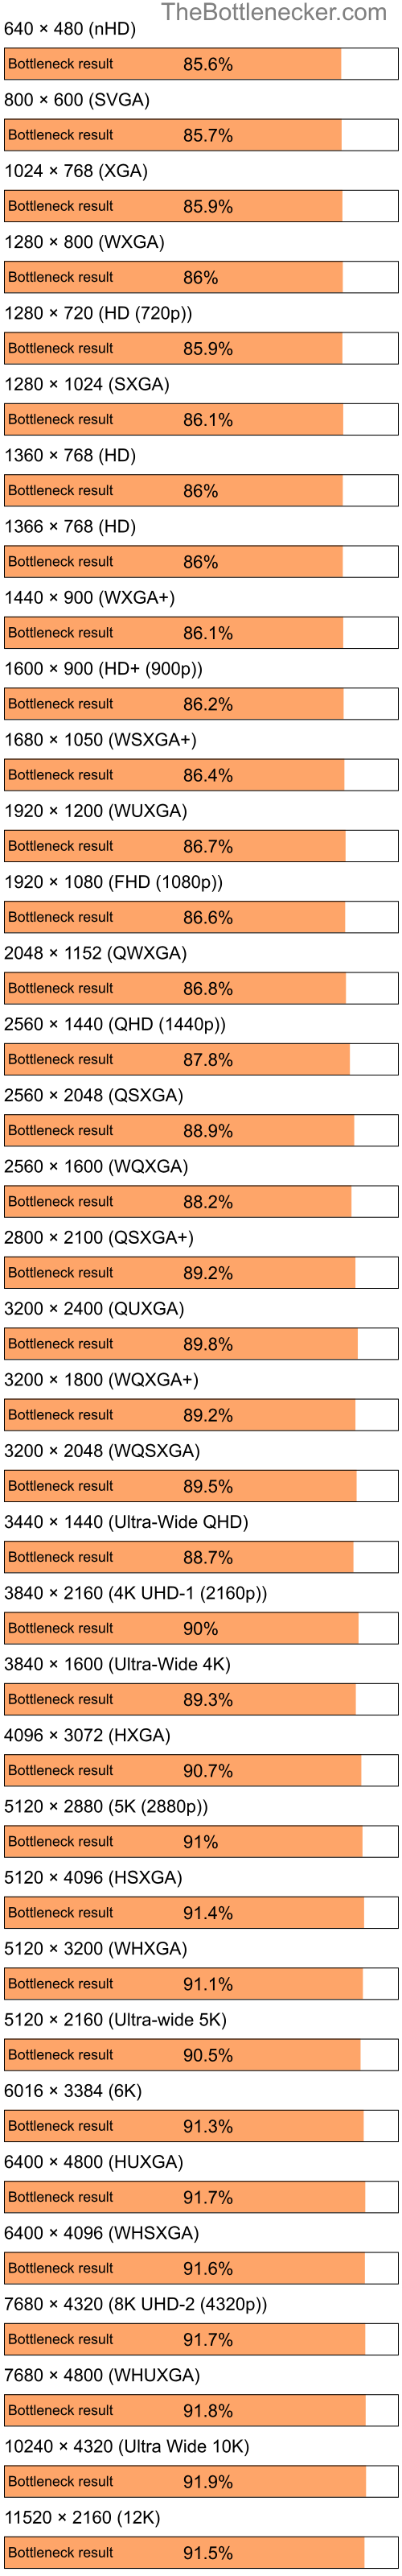 Bottleneck results by resolution for Intel Celeron and NVIDIA GeForce 7150M in Graphic Card Intense Tasks